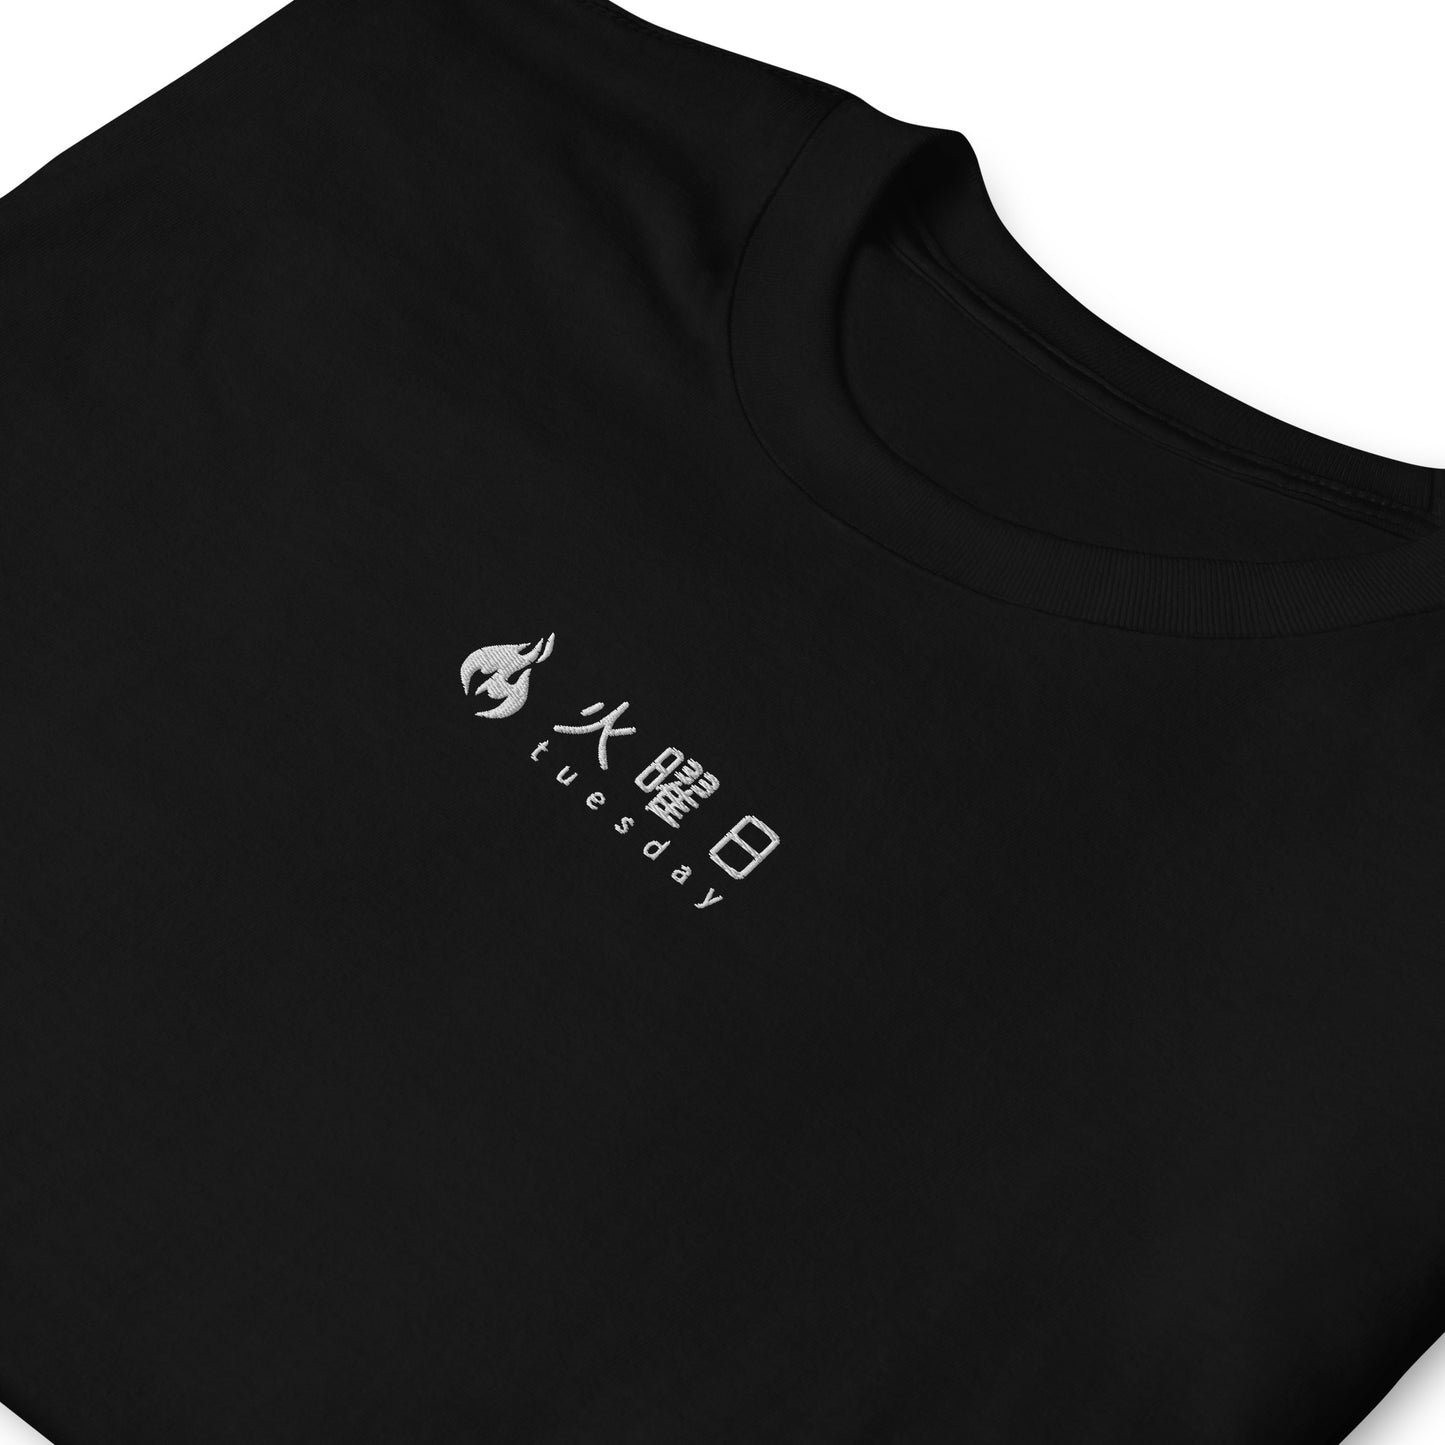 Black High Quality Tee - Front Design with an Black embroidery "Tuesday" in Japanese and English